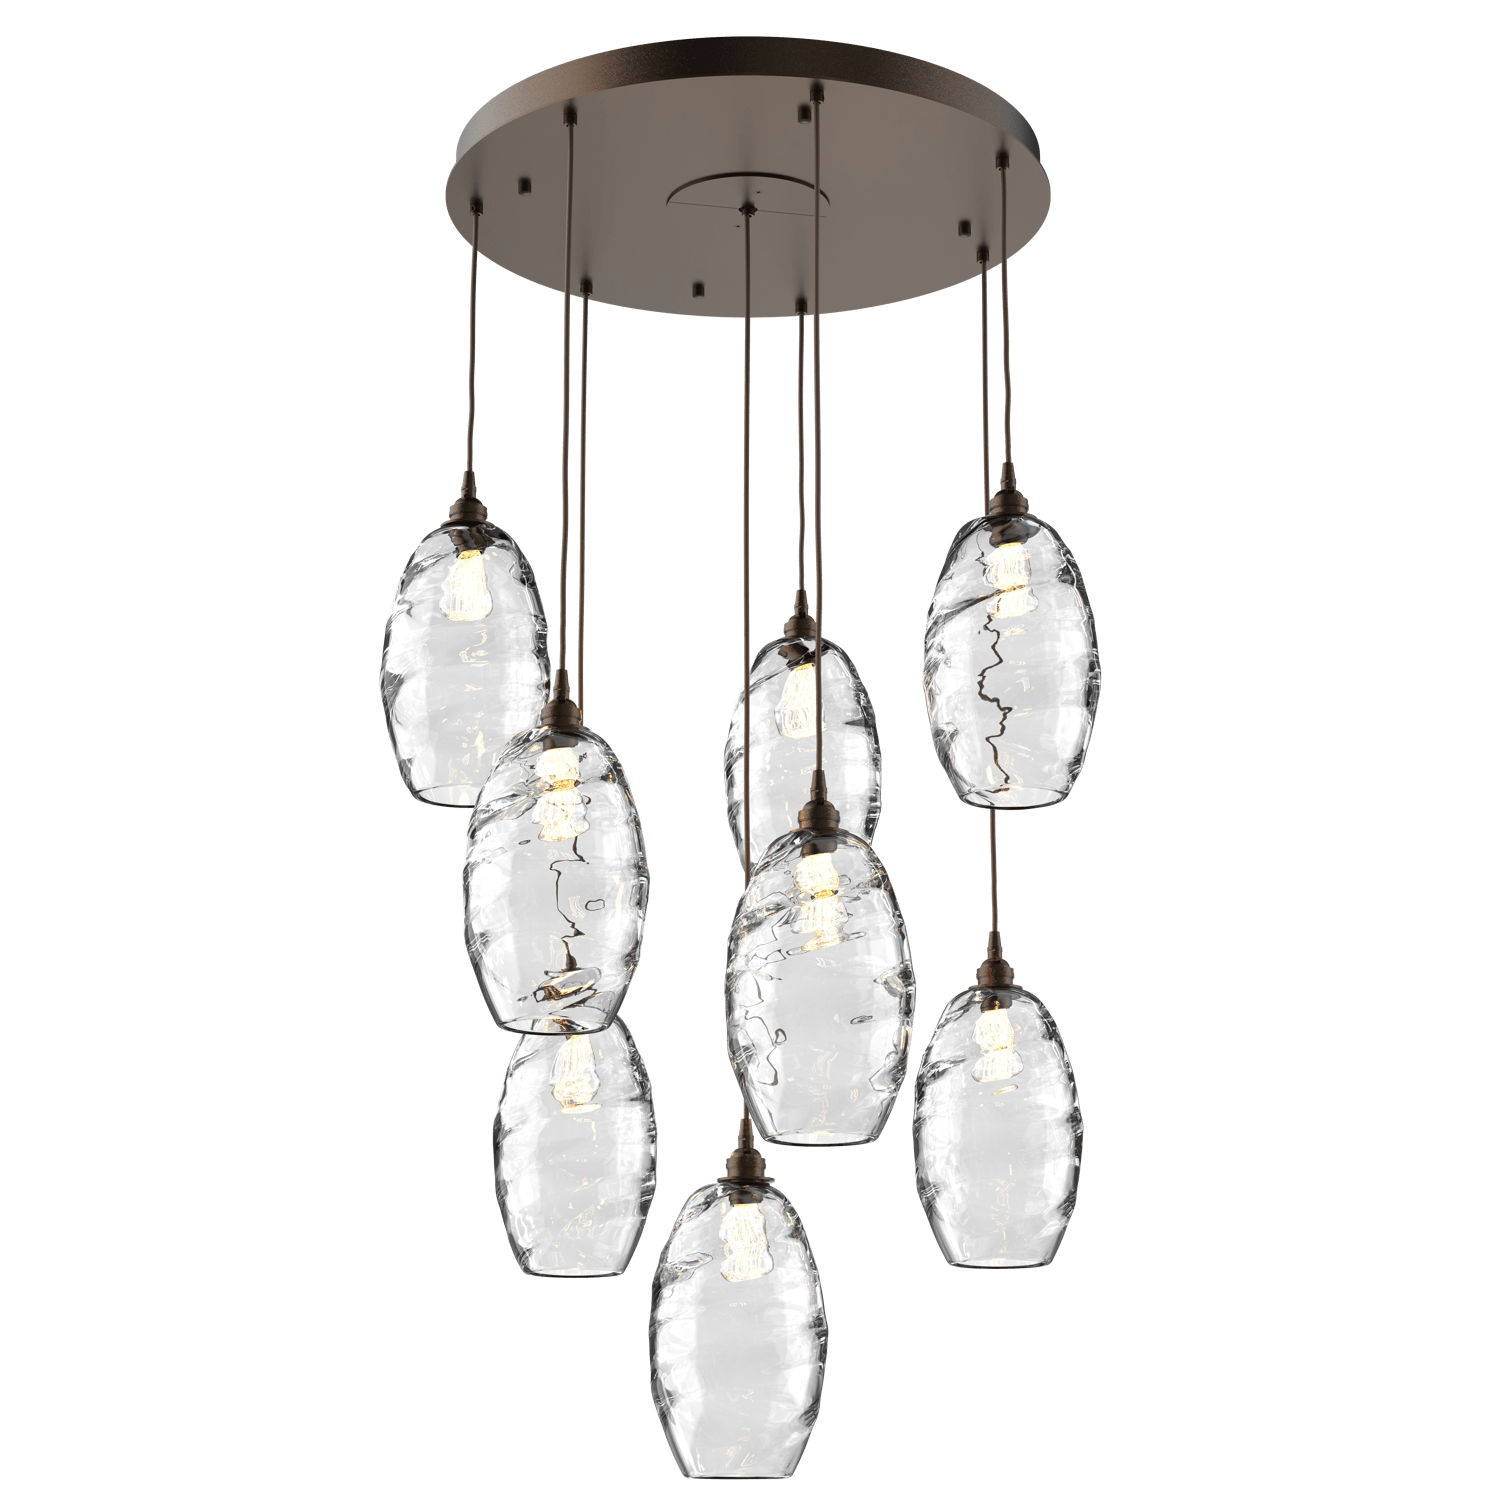 CHB0035-08-FB-OC-Hammerton-Studio-Optic-Blown-Glass-Elisse-8-light-round-pendant-chandelier-with-flat-bronze-finish-and-optic-clear-blown-glass-shades-and-incandescent-lamping